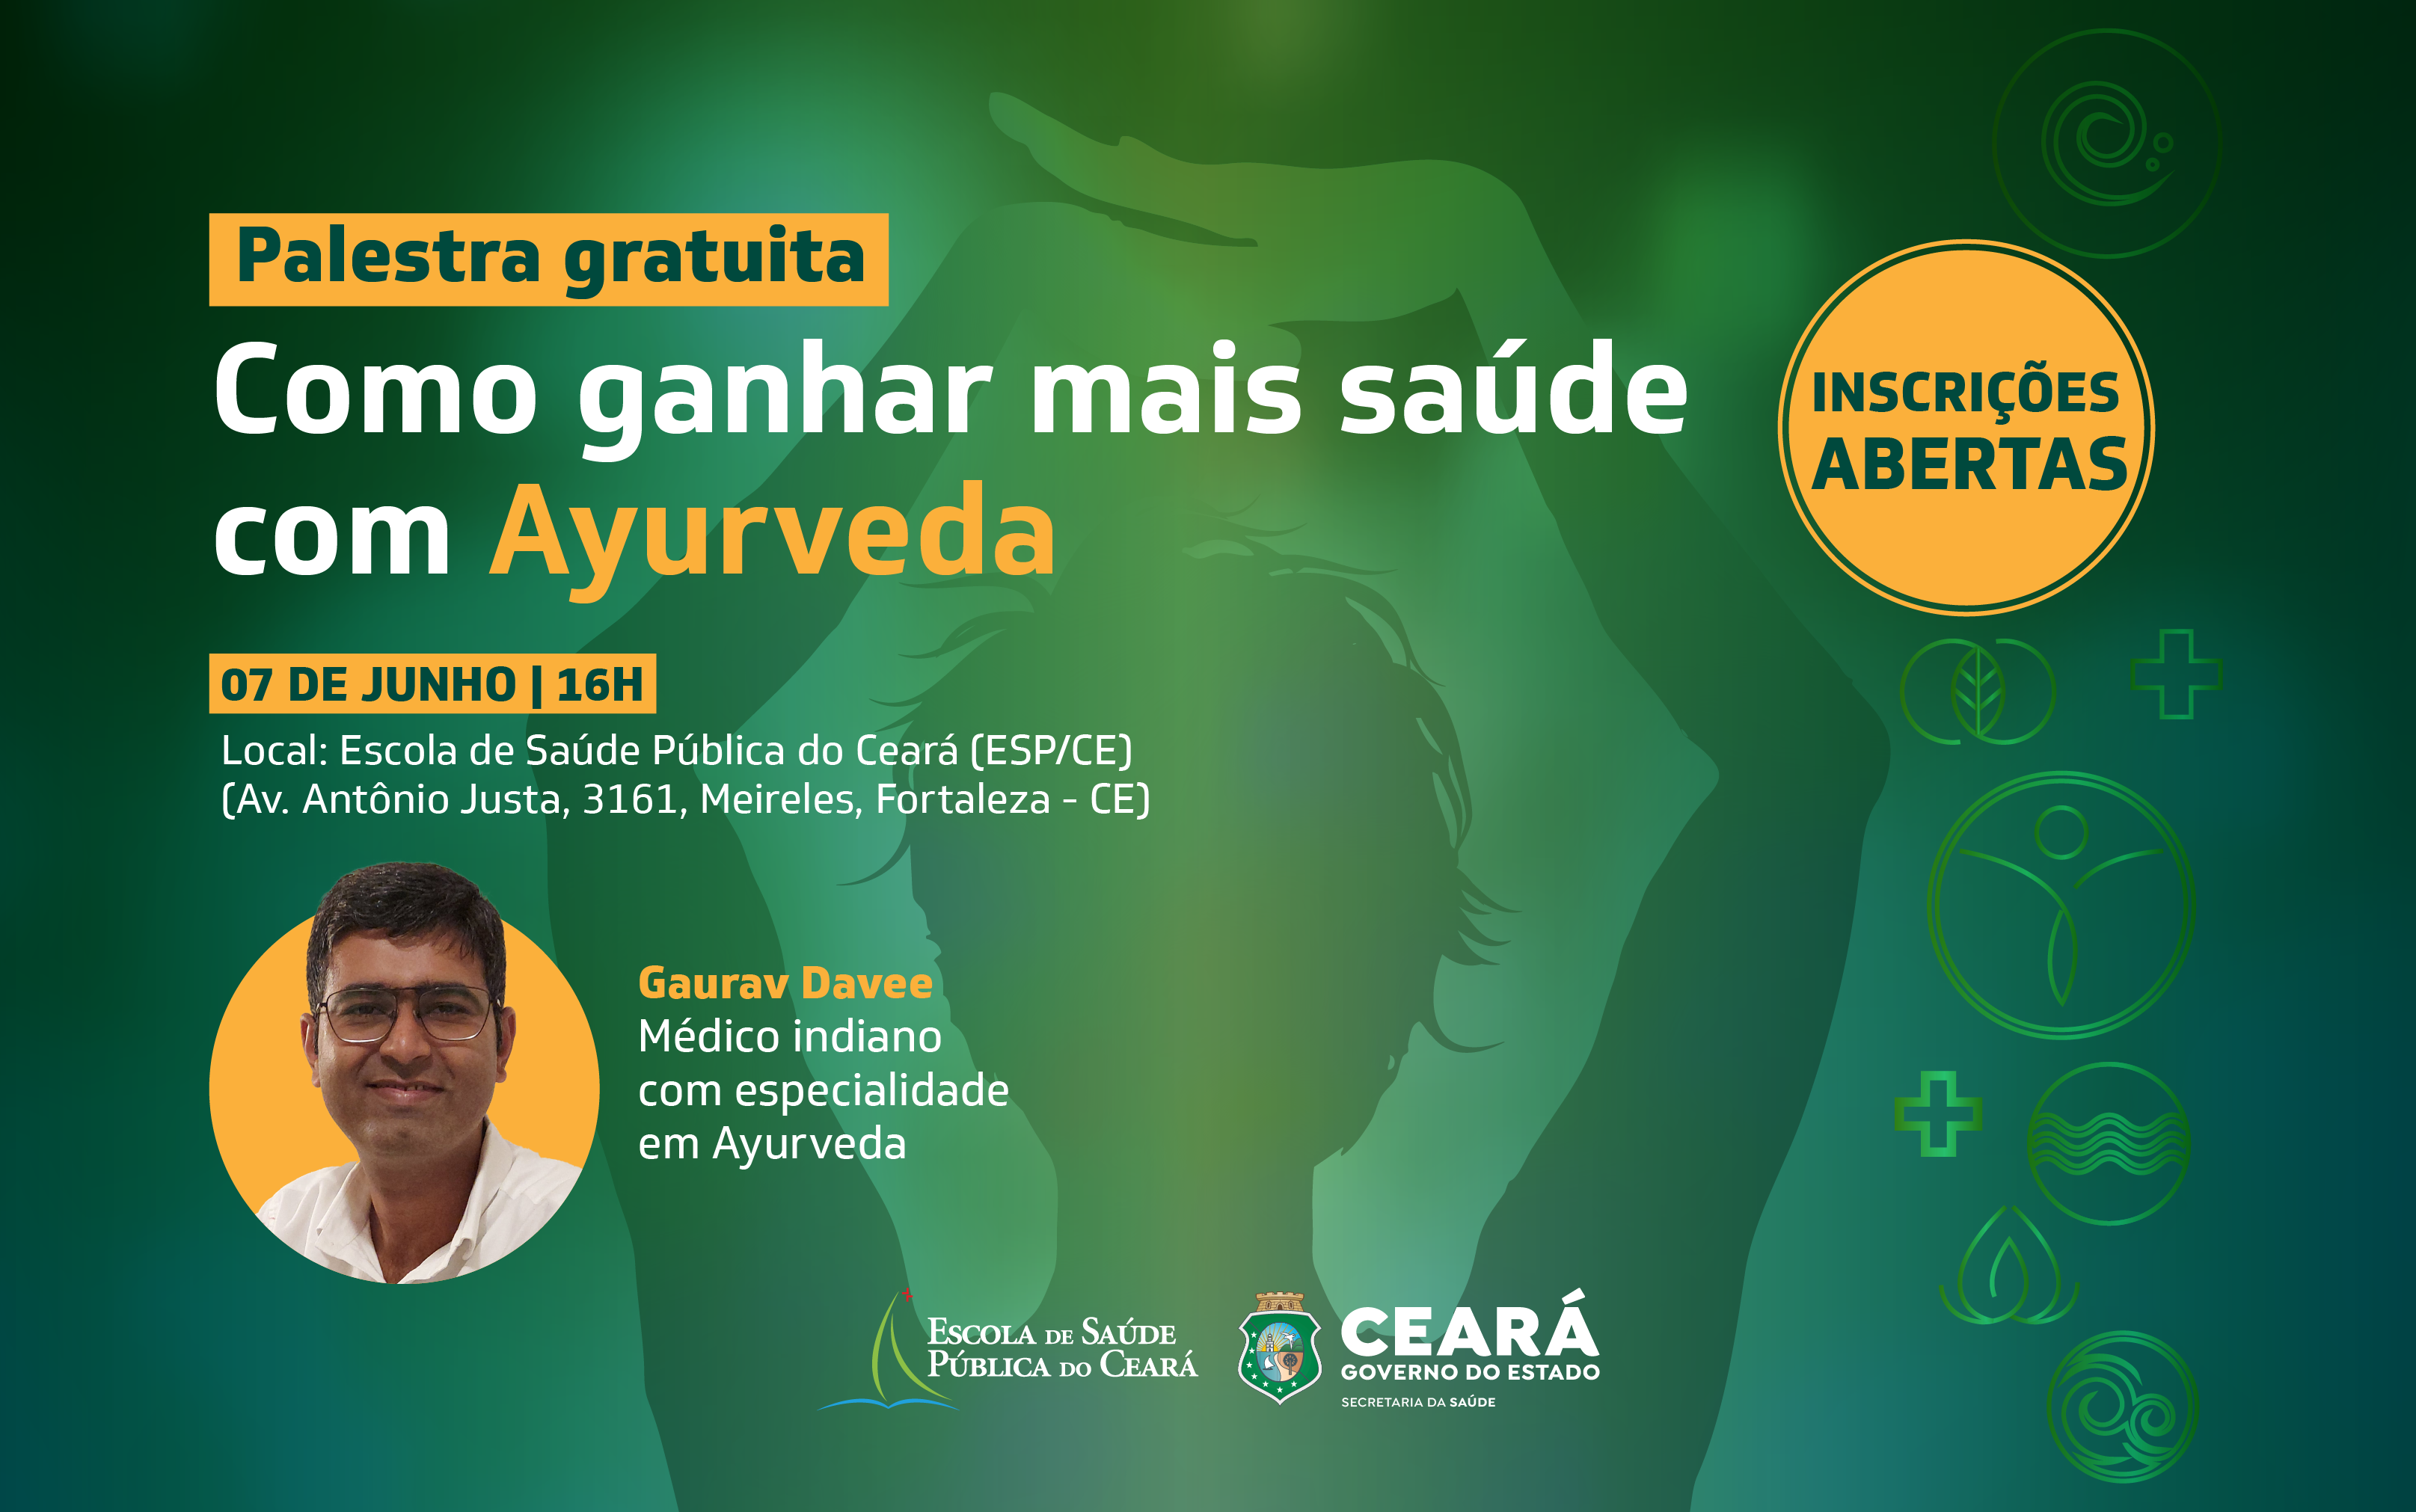 Saúde do Ceará promotes a free lecture on Ayurvedic medicine;  Subscriptions are free